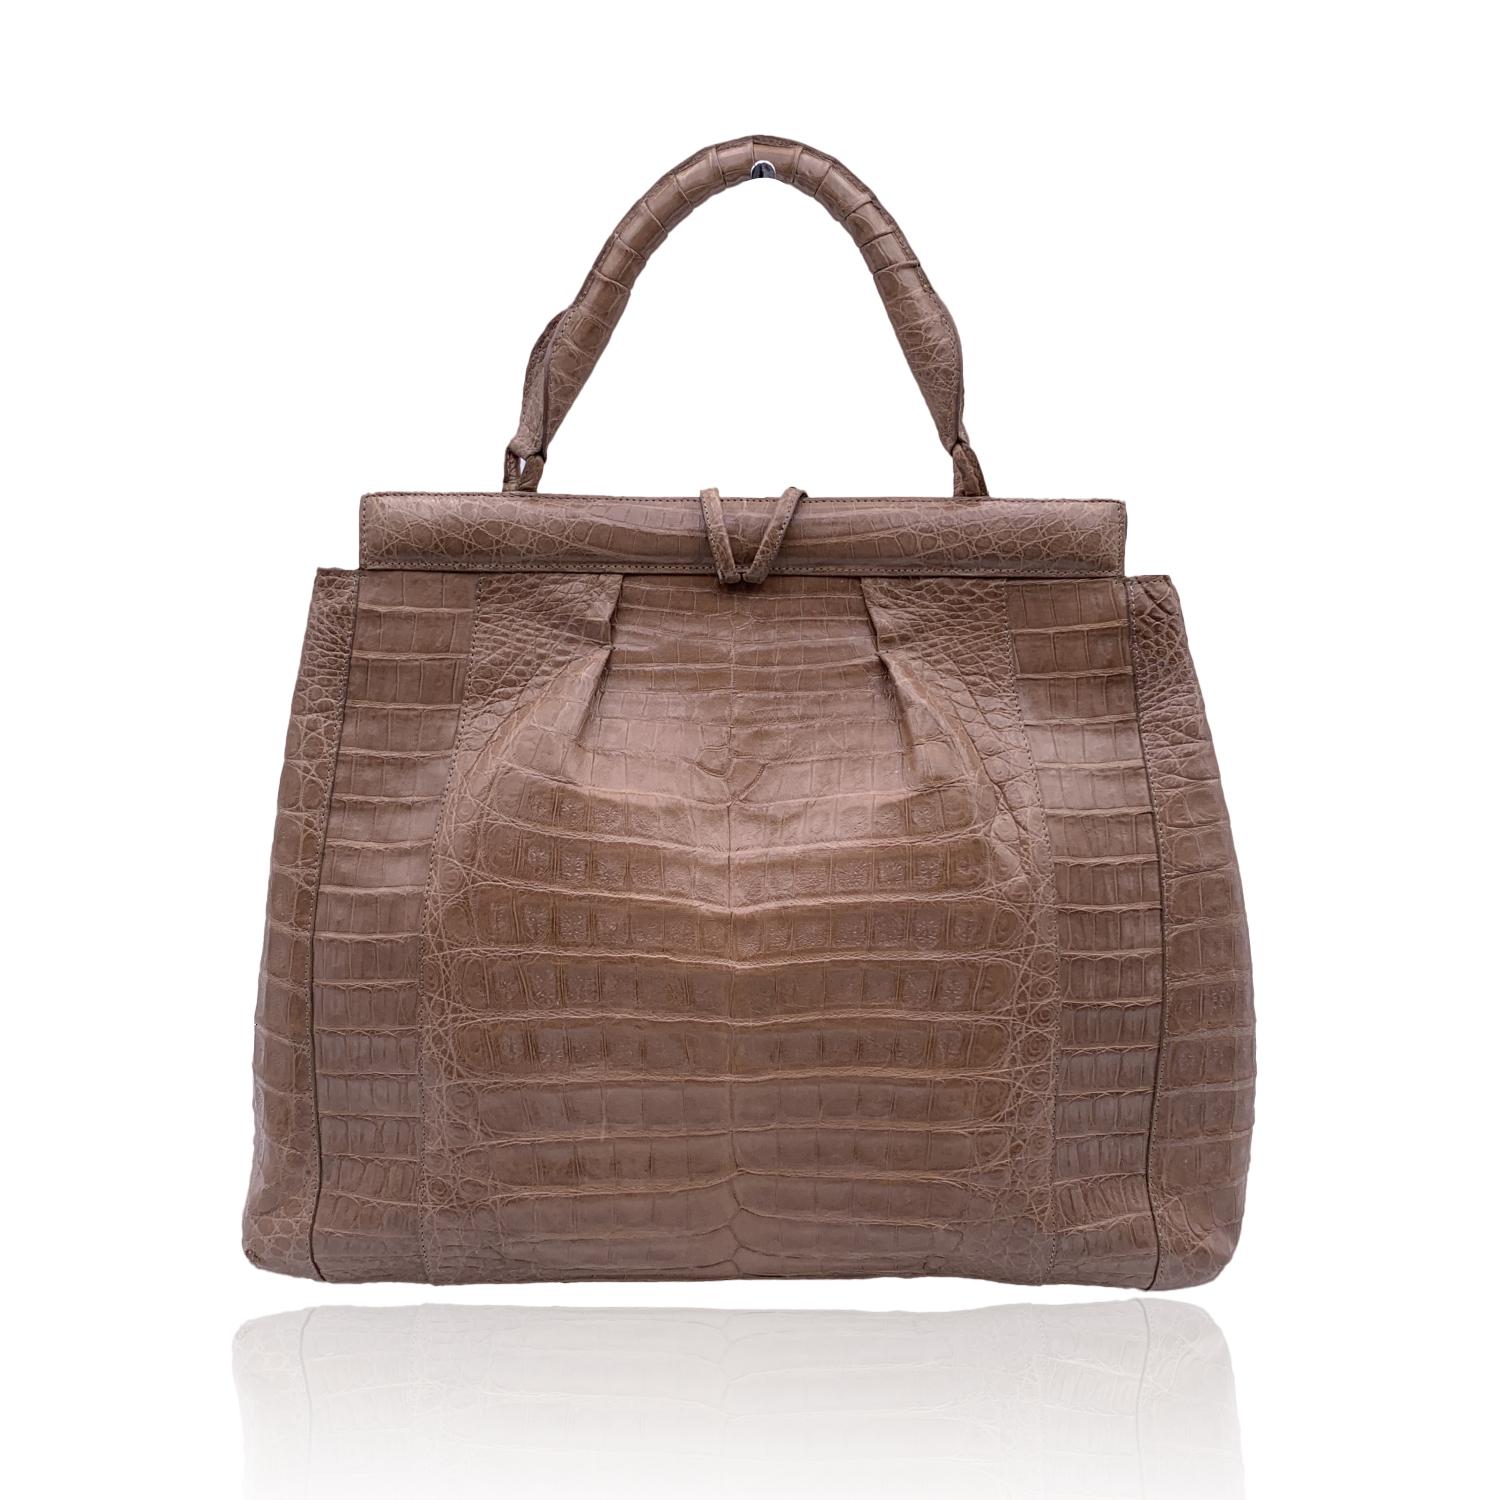 Nancy Gonzales Taupe Leather Satchel Handbag Top Handle Bag In Excellent Condition In Rome, Rome